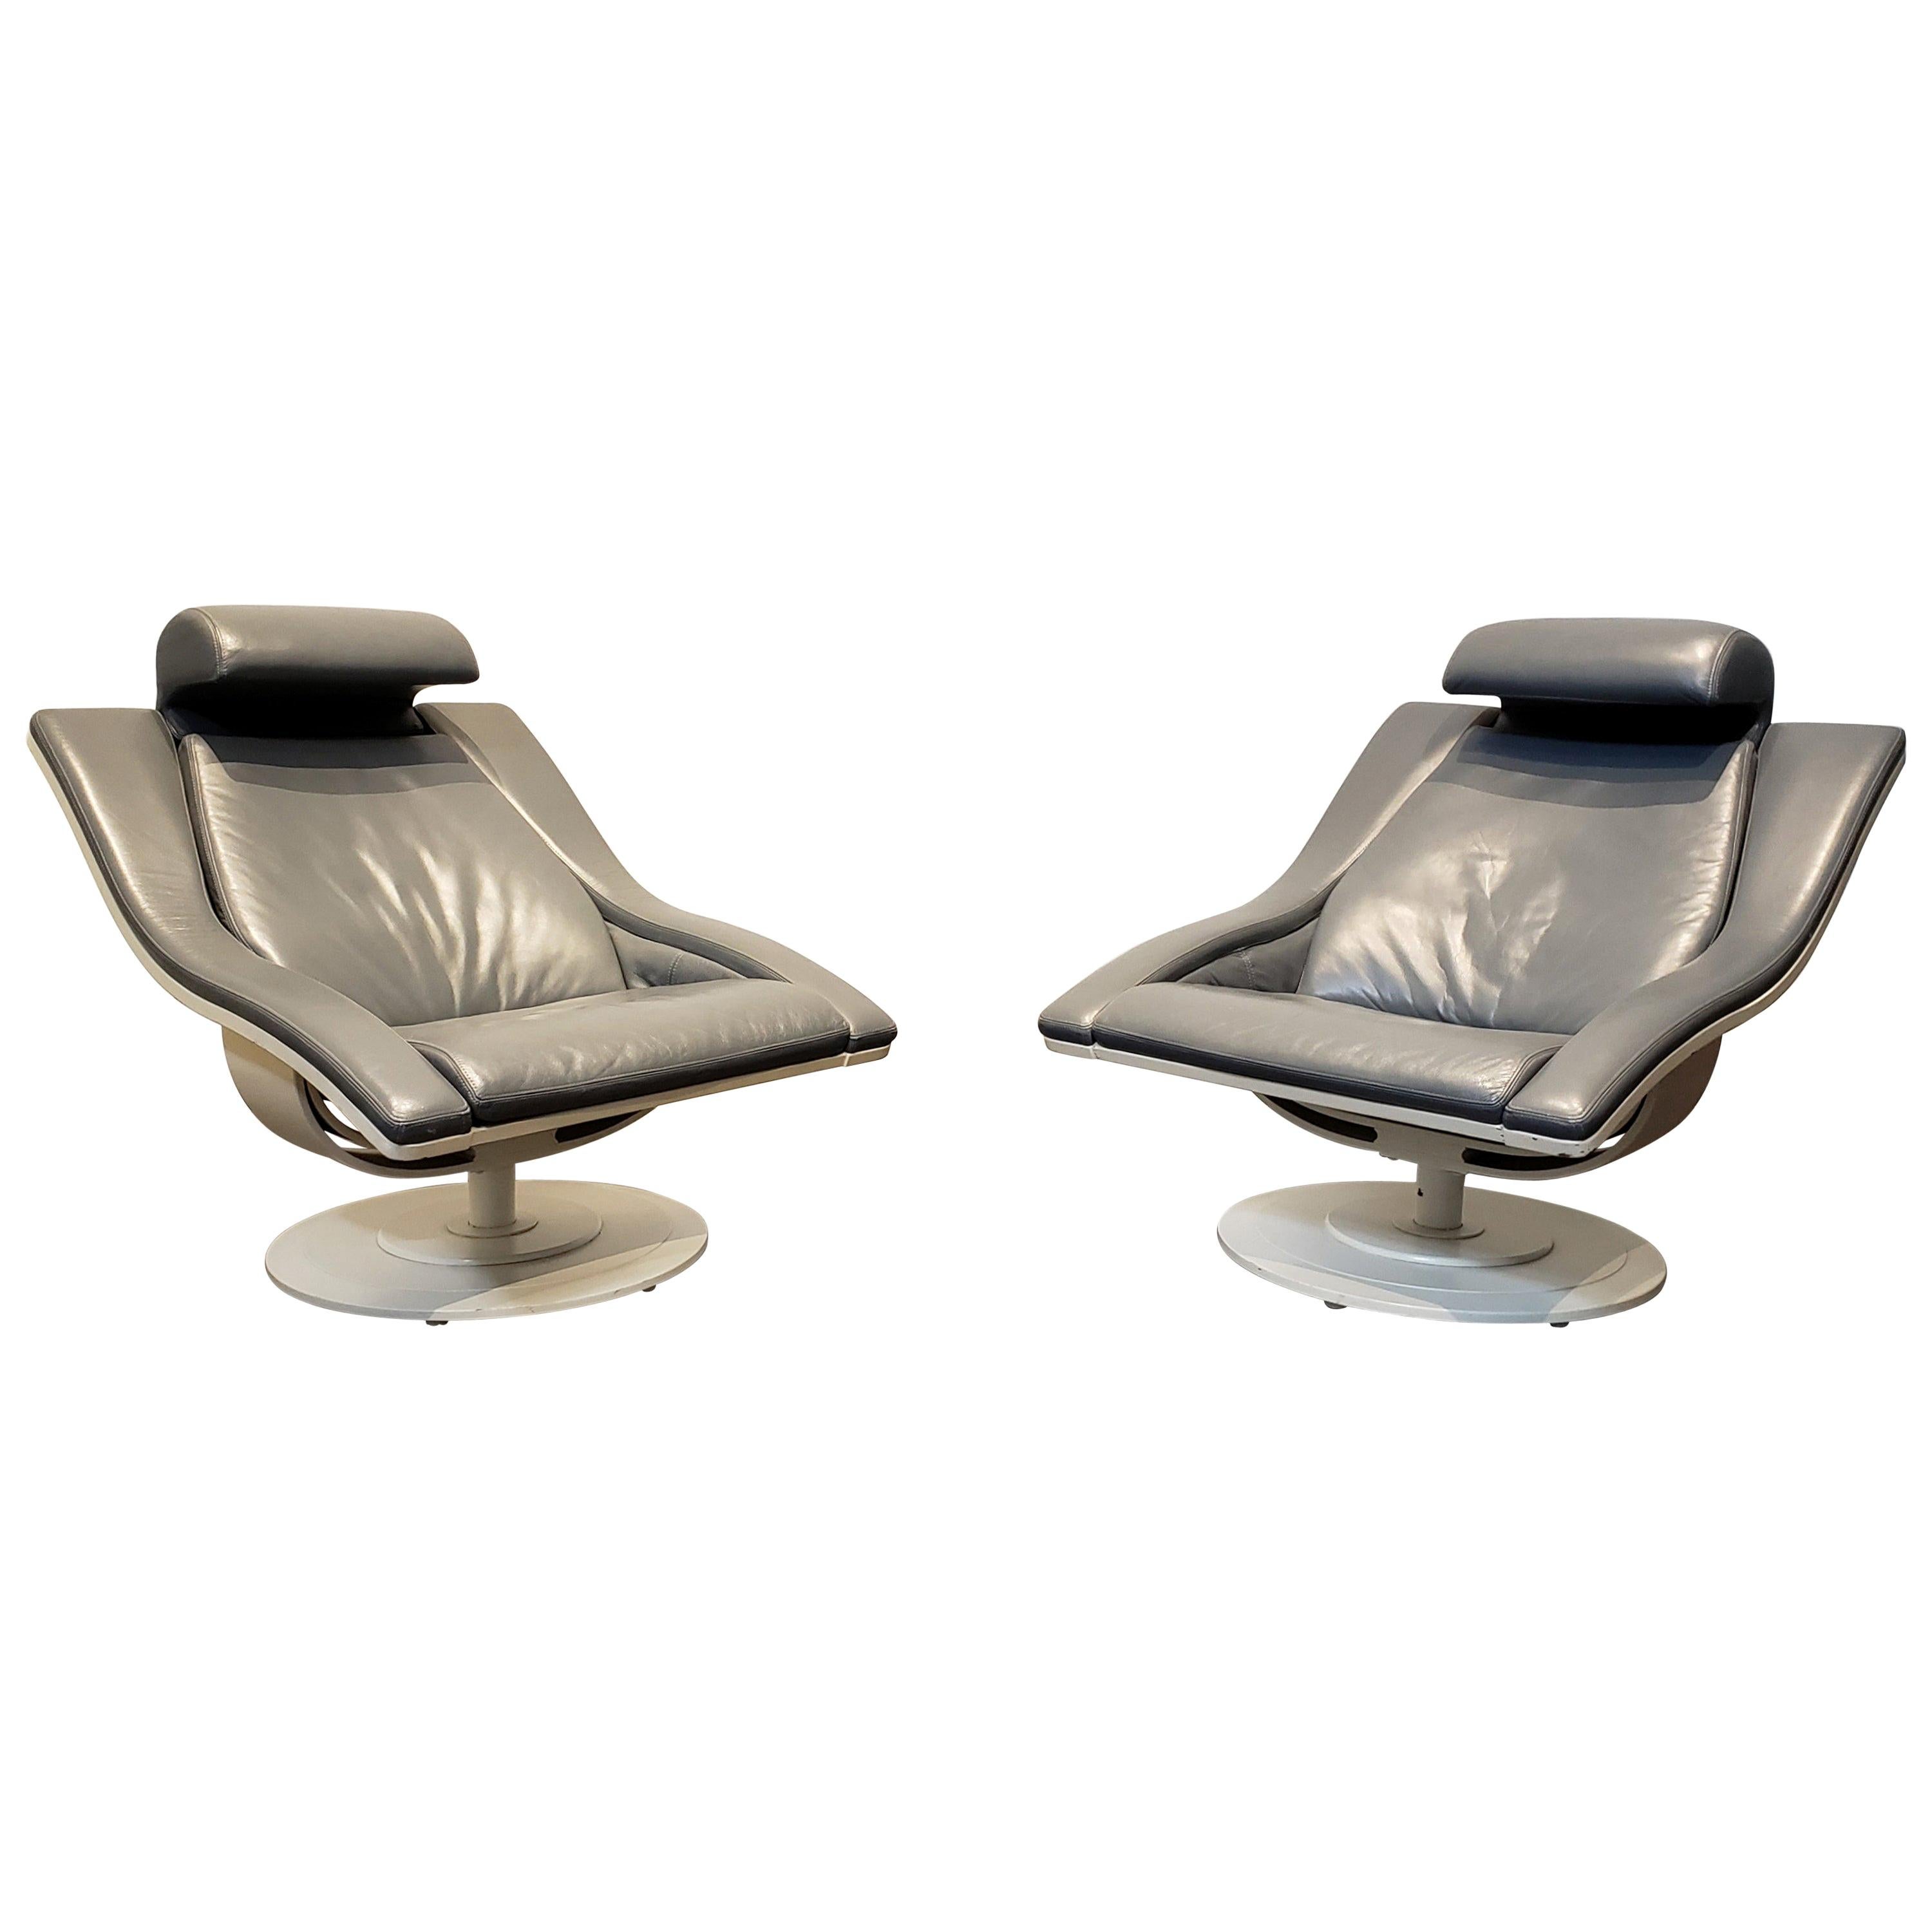 Pair of Structural Mid-Century Modern Leather Swivel Lounge Chairs For Sale